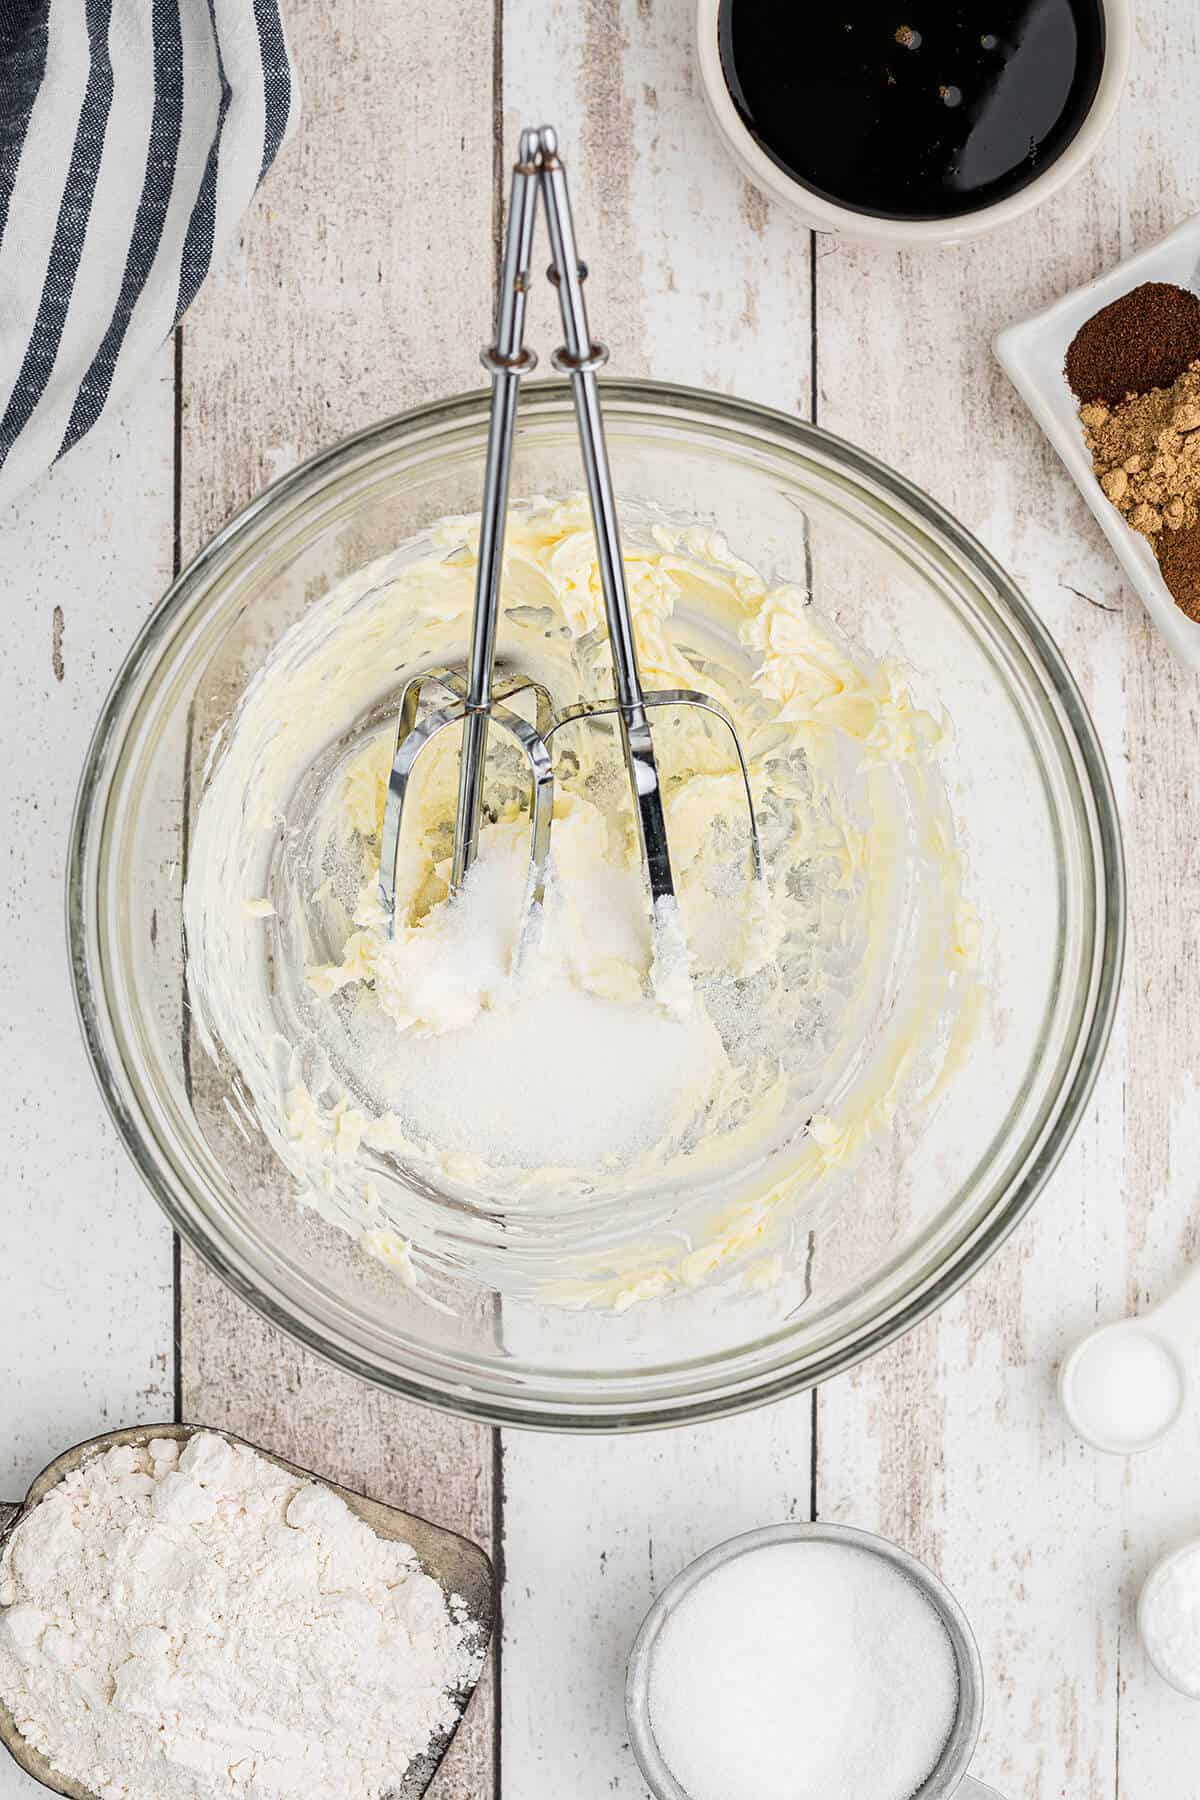 Sugar added to butter in a mixing bowl.